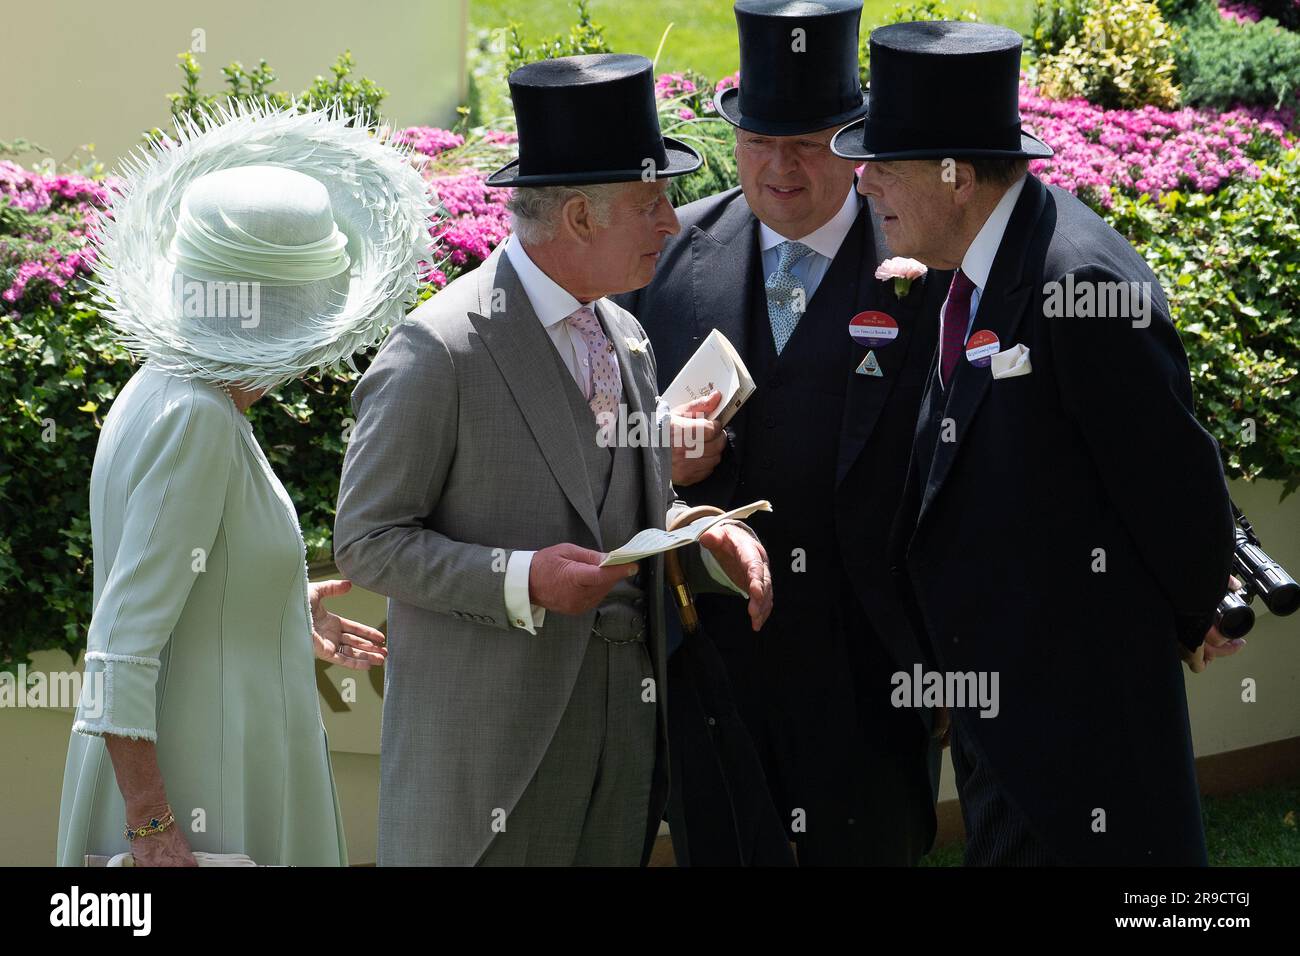 Ascot, Berkshire, UK. 22nd, June, 2023. King Charles III in the Parade Ring at Ascot Racecourse on Ladies Day chatting with Sir Francis Brooke His Majesty's Representative and The Rt. Hon the Lord Soames of Fletching (R). Credit: Maureen McLean/Alamy Stock Photo